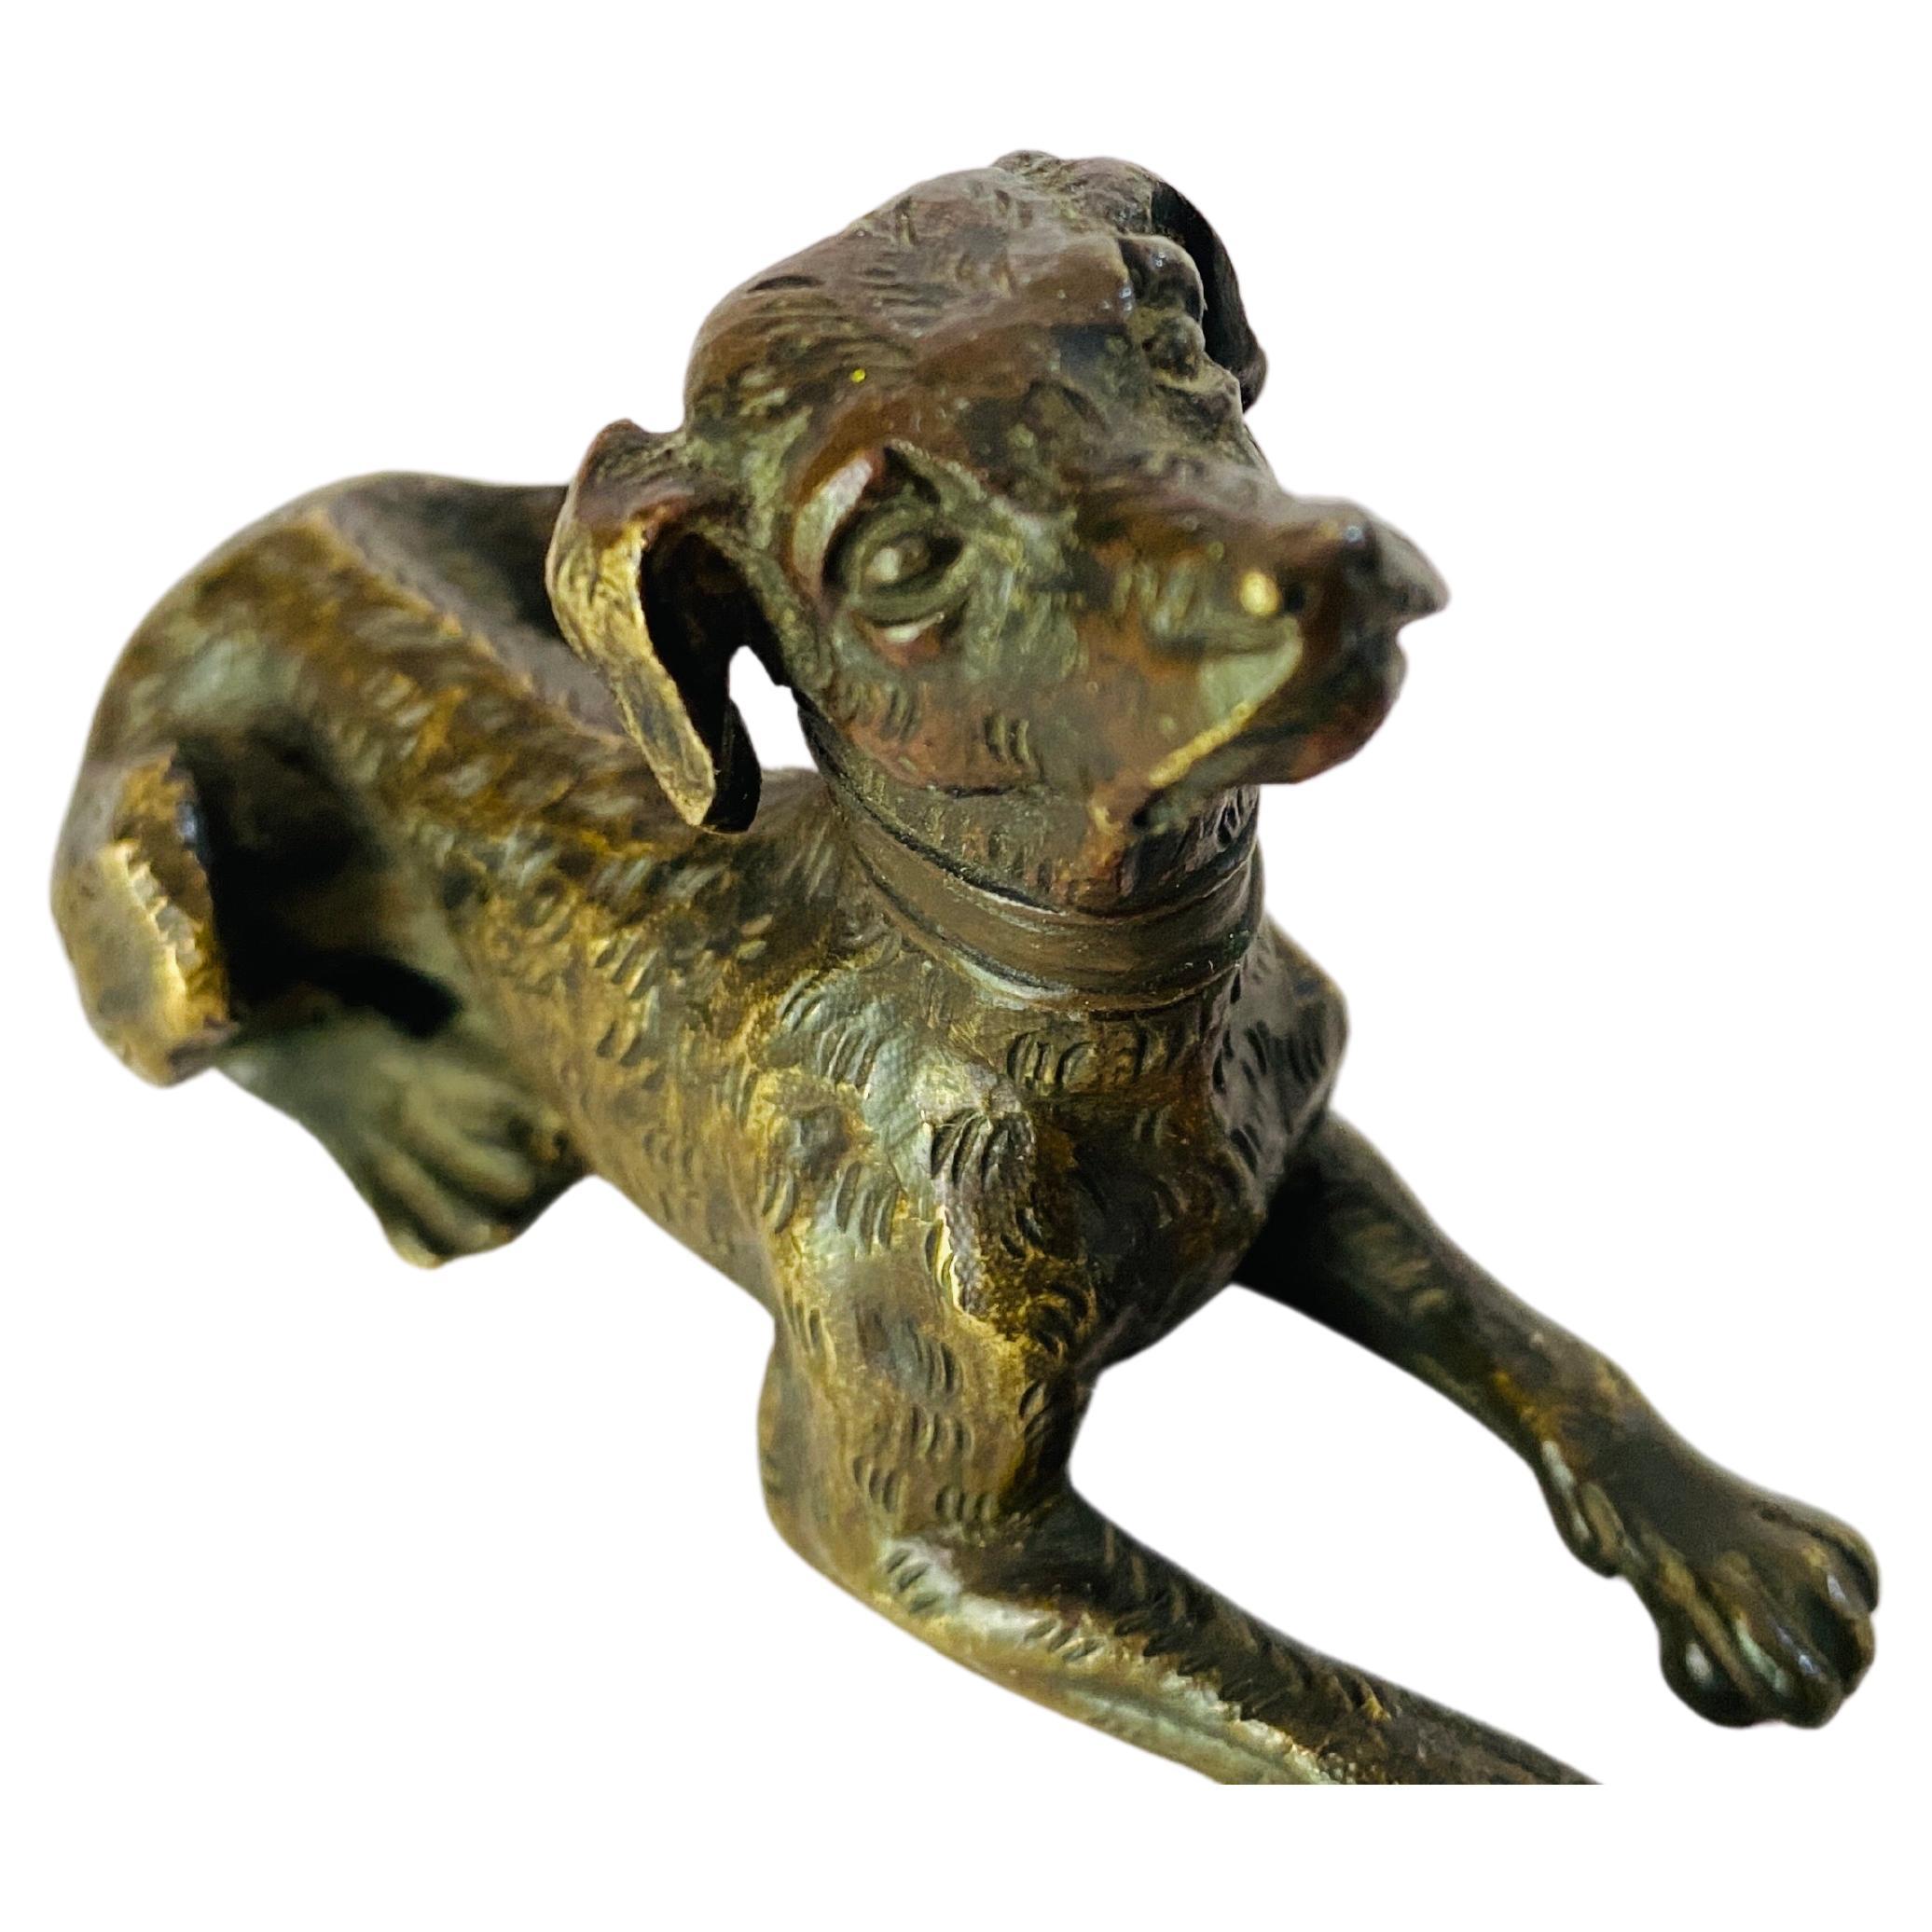 Vienna cold painted bronze of a Cat antique figure.

Offered is a Viennese cold-painted bronze figure of a Cat dating to the early 20th century. He shows an antique patina with expected losses to the original paint.